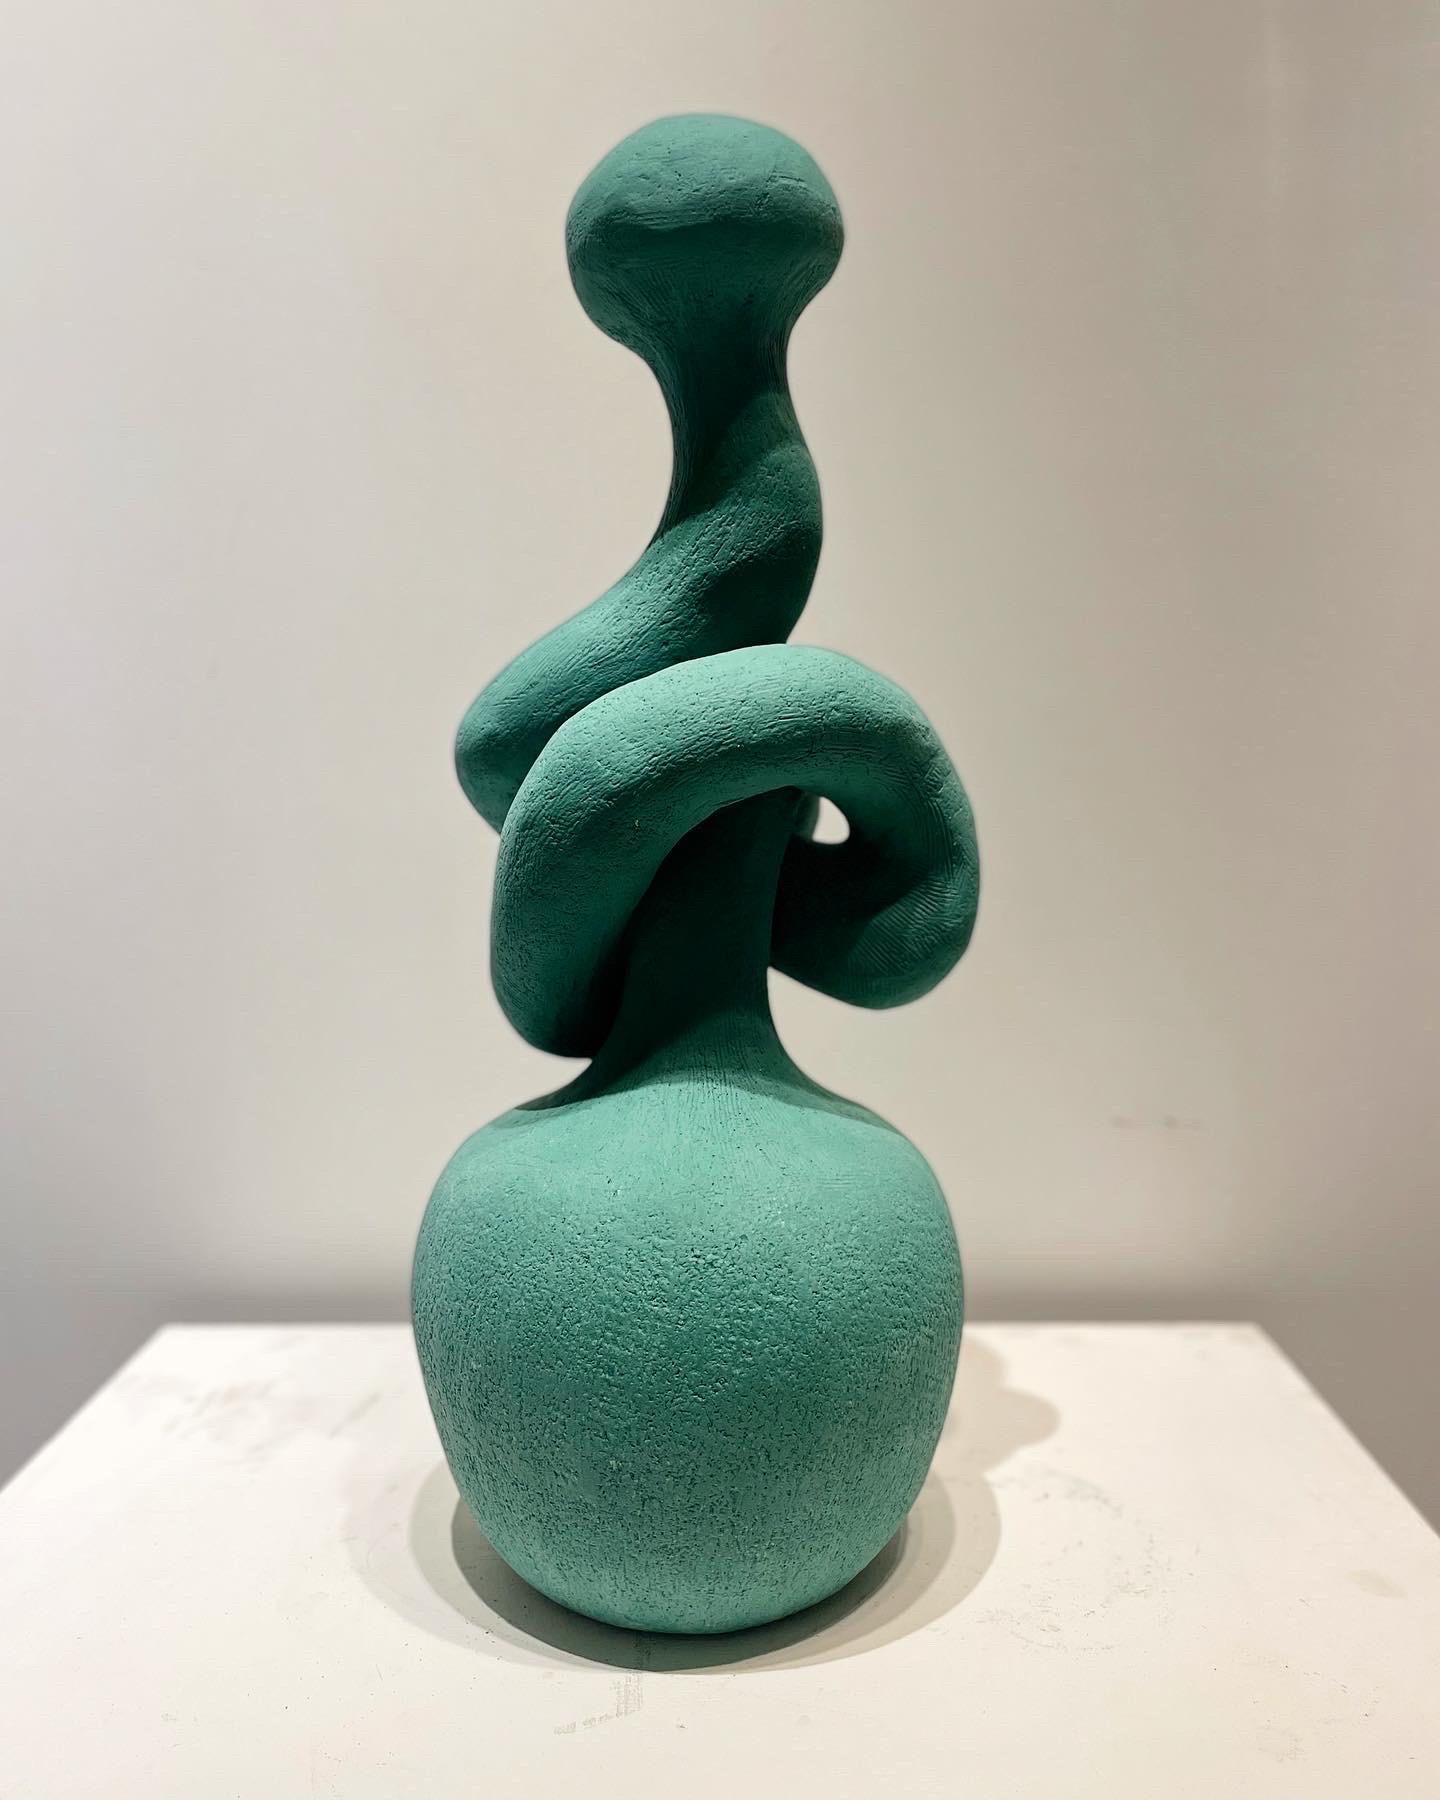 The Knot table sculpture or lamp, handmade in recycled stoneware clay and shown here in Wintergreen, by artist Stef Duffy. 

Measures approx 25” height x 8” diameter. Can be wired for use as a table lamp (form is hollow and has a hole at bottom